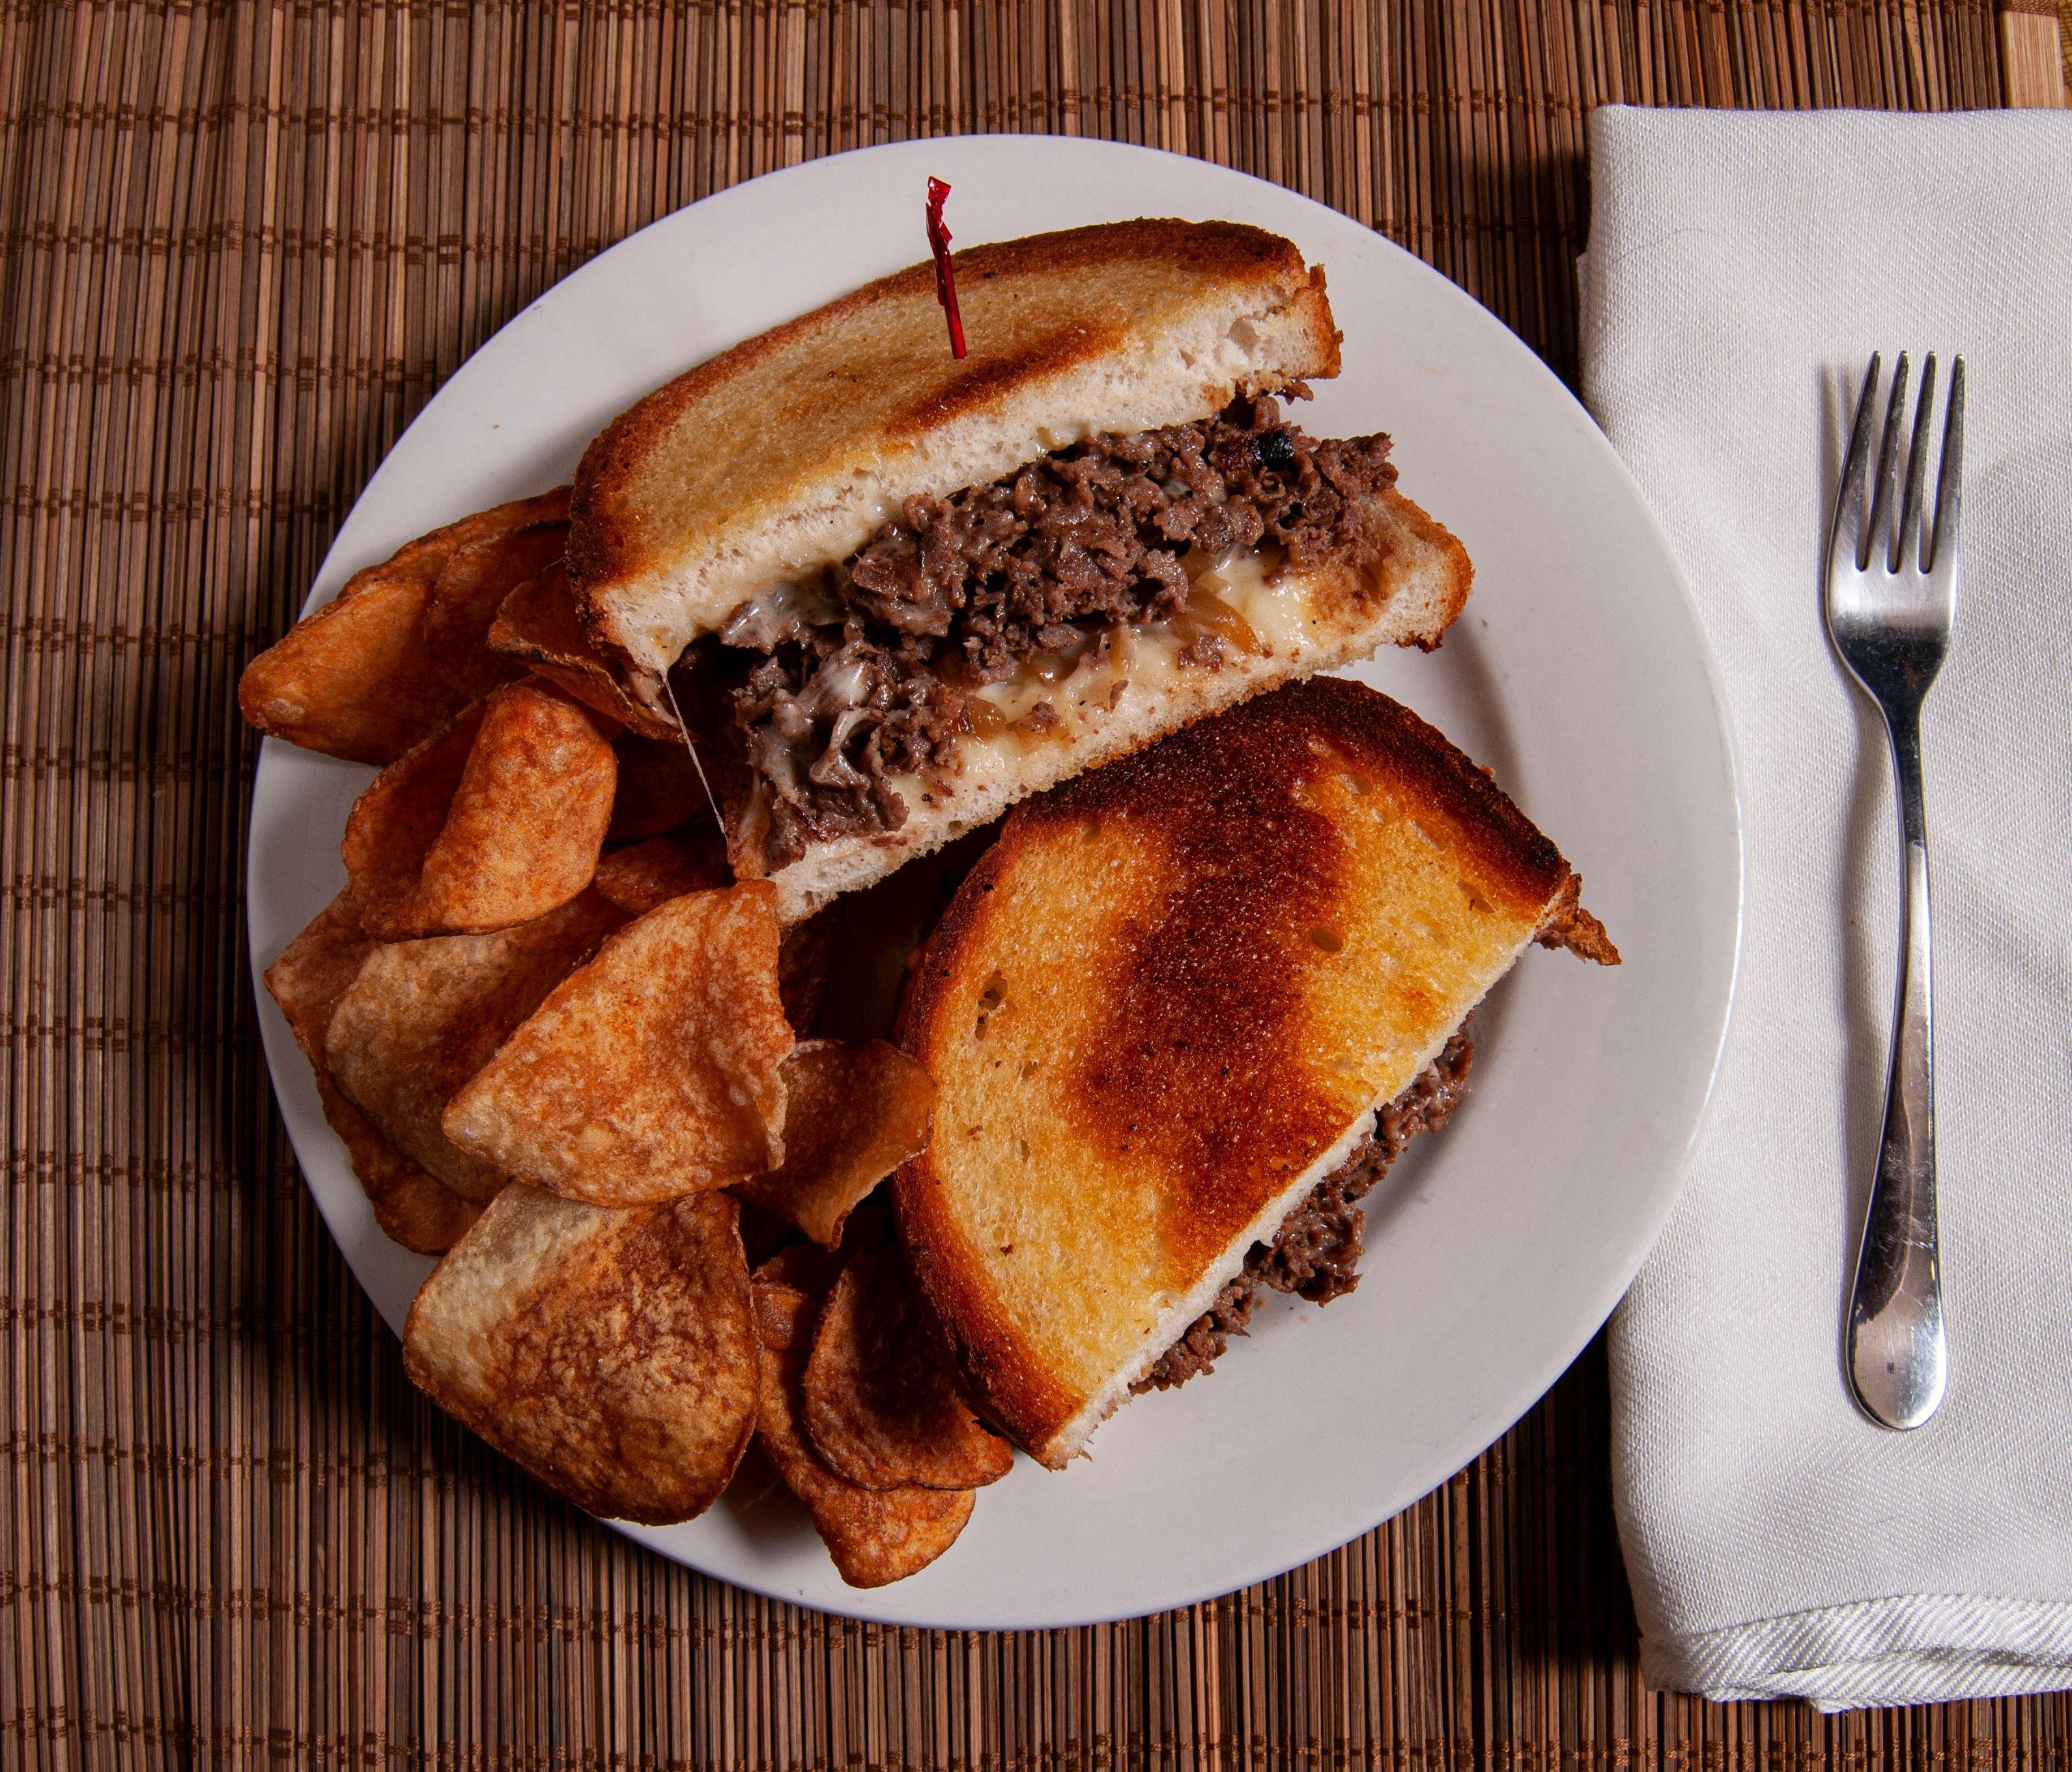 113 Fayette St - Grilled Philly Steak